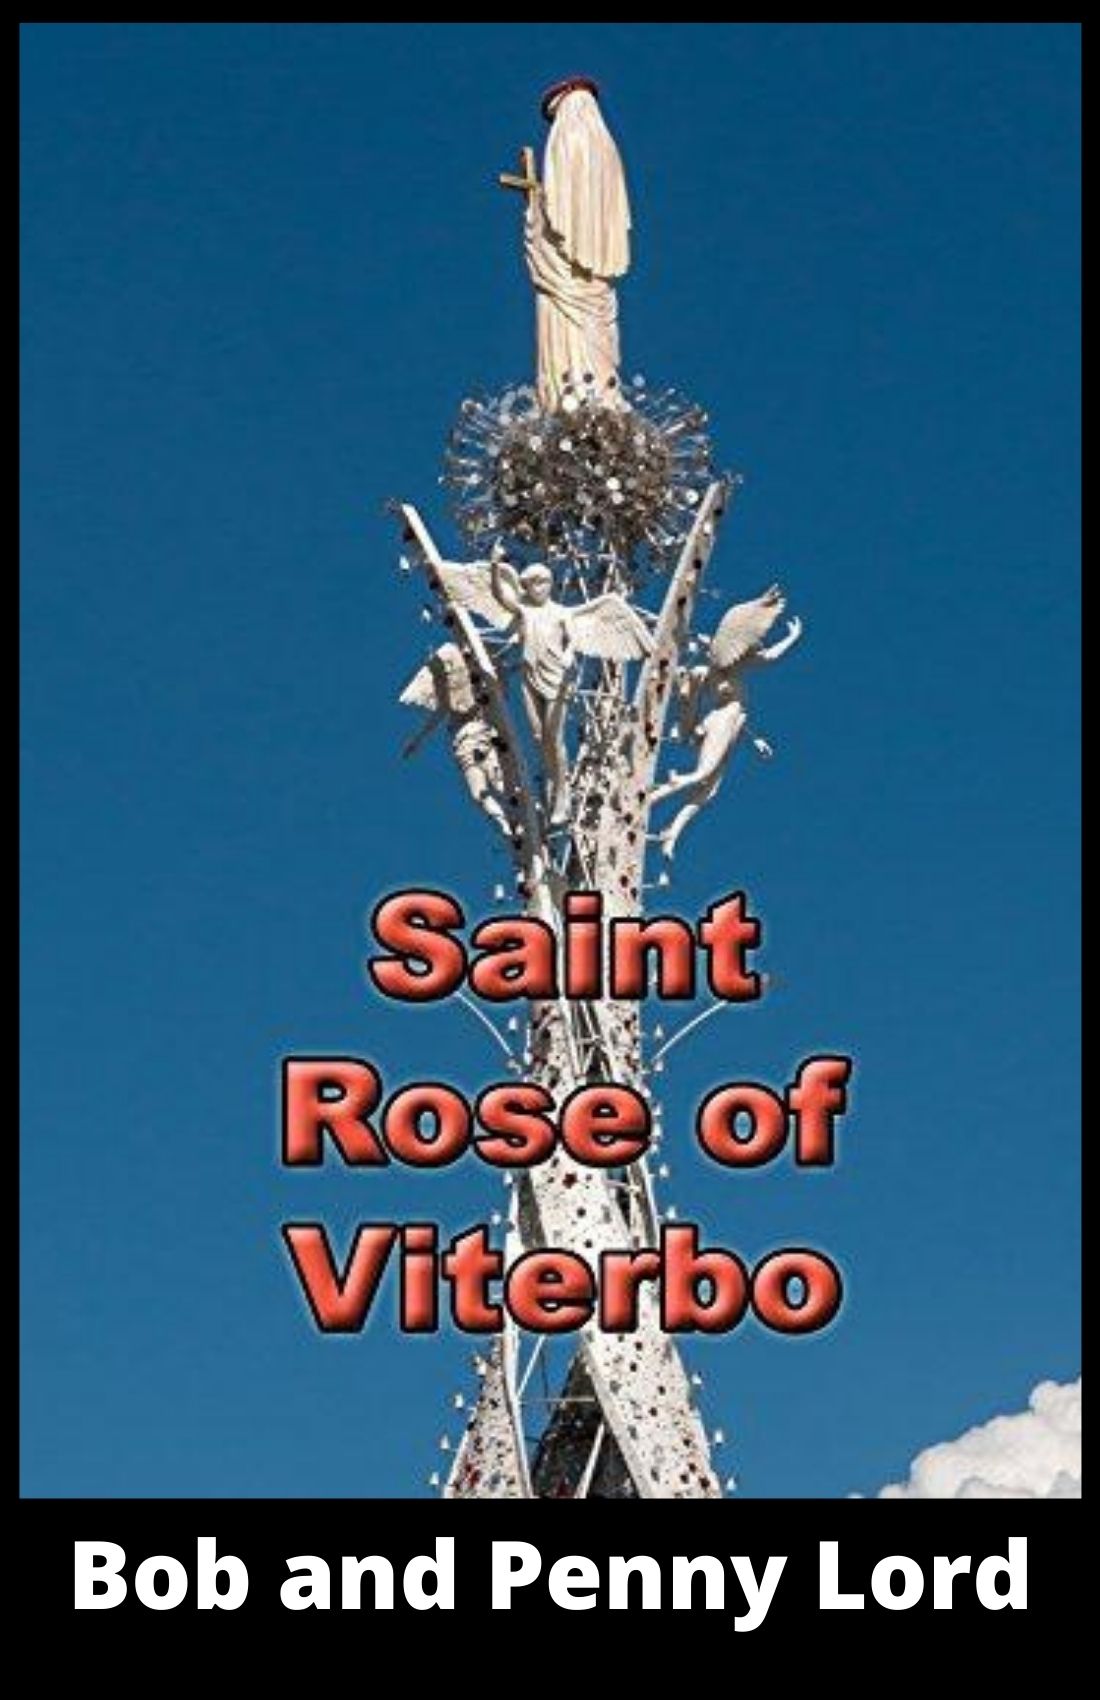 Saint Rose of Viterbo Minibook - Bob and Penny Lord